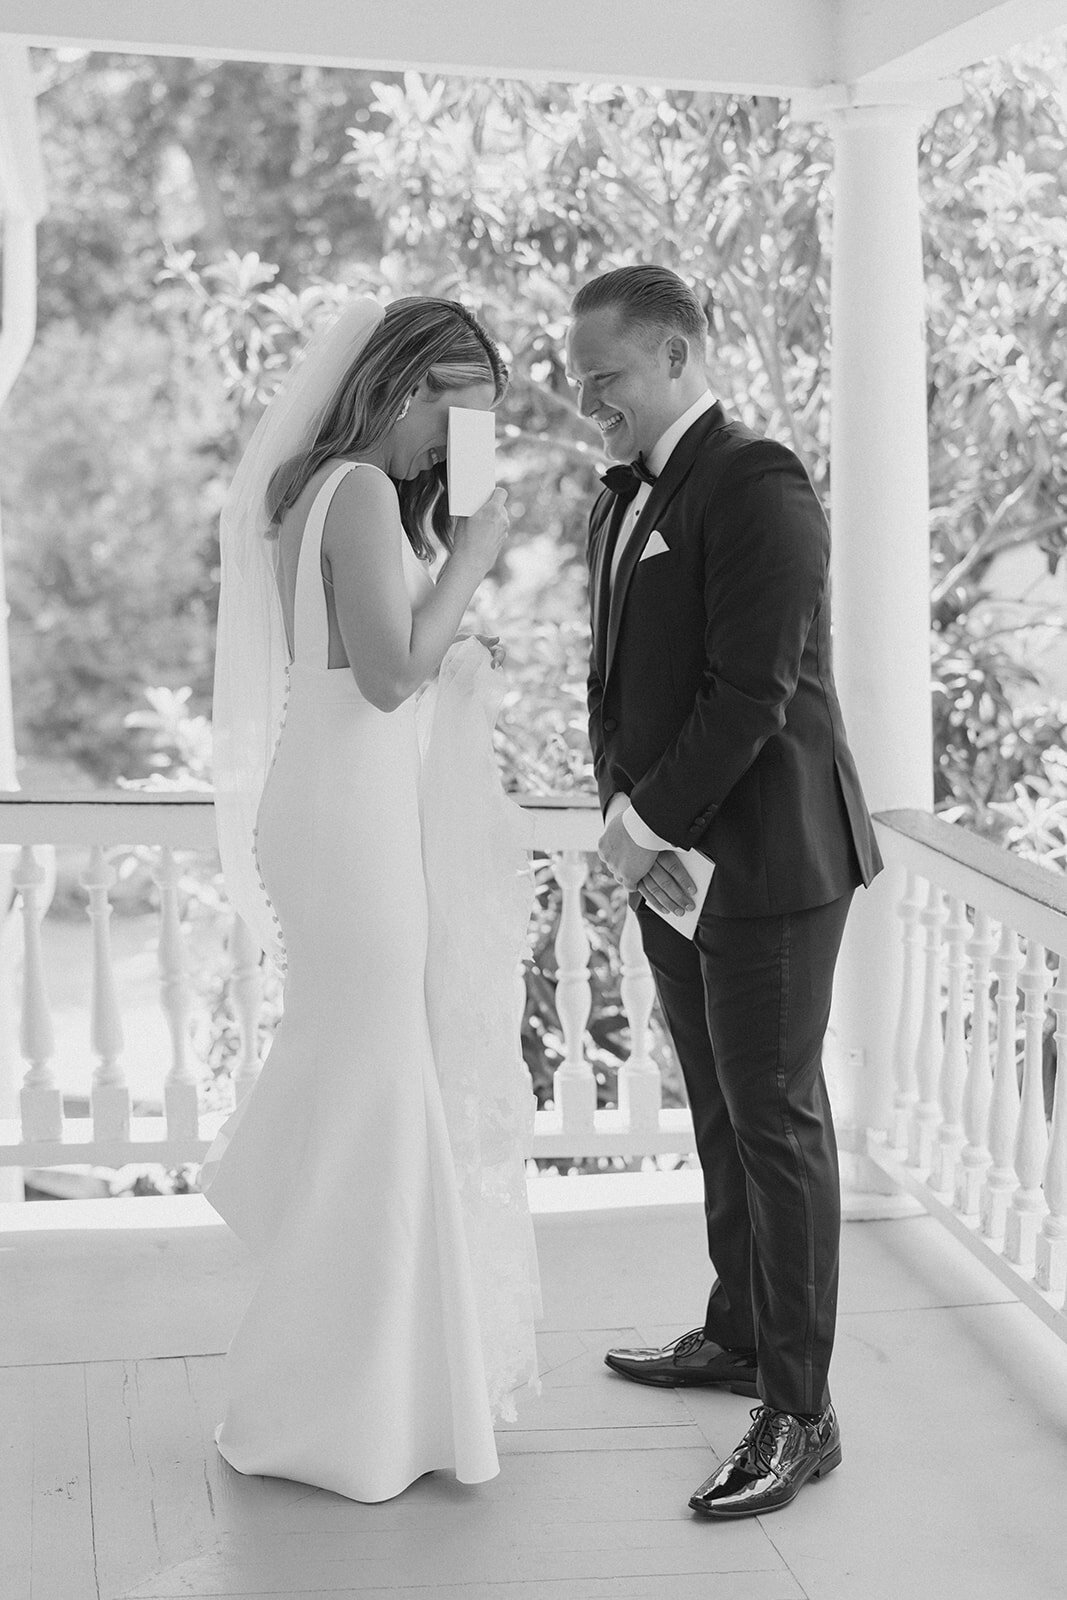 Private vow reading on a porch in downtown Charleston. Bride covers her eyes with groom smiling at her during cute candid moment on wedding day. Charleston wedding photographer.